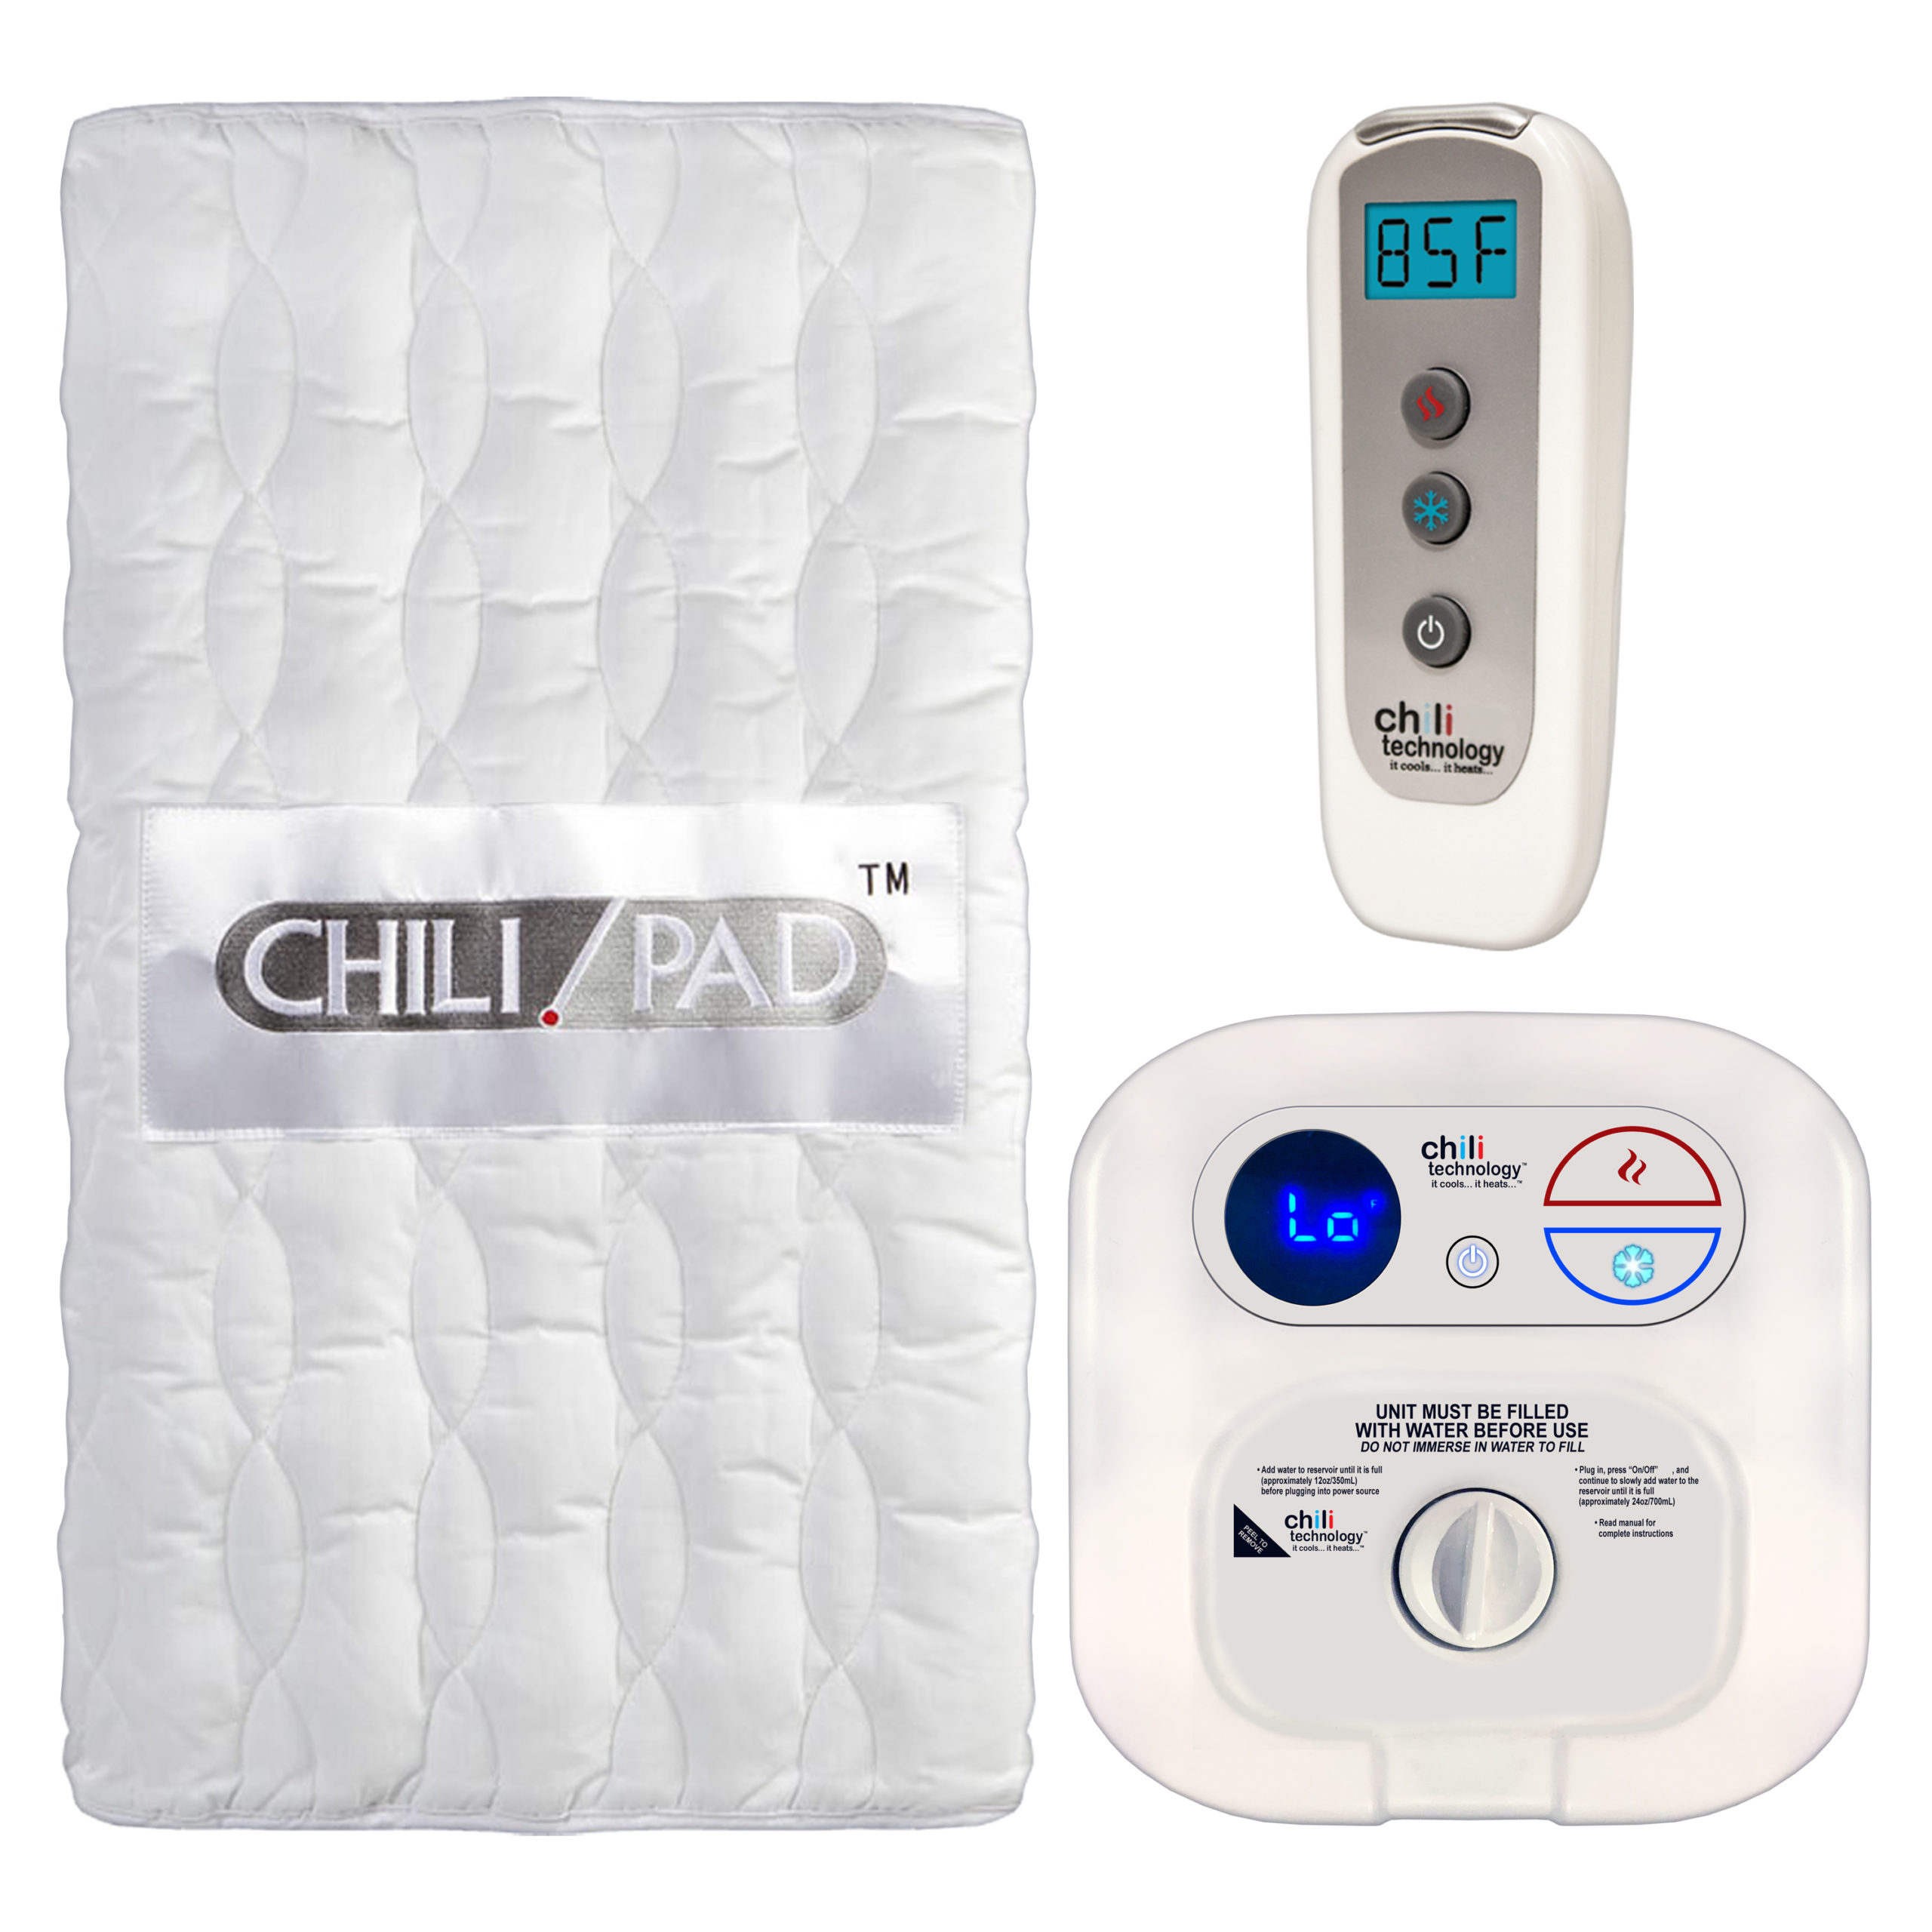 Electric Dog Blanket Outdoors - Chilipad|Temperature|Mattress|Cube|Sleep|Bed|Water|System|Pad|Ooler|Control|Unit|Night|Bedjet|Technology|Side|Air|Product|Review|Body|Time|Degrees|Noise|Price|Pod|Tubes|Heat|Device|Cooling|Room|King|App|Features|Size|Cover|Sleepers|Sheets|Energy|Warranty|Quality|Mattress Pad|Control Unit|Cube Sleep System|Sleep Pod|Distilled Water|Remote Control|Sleep System|Desired Temperature|Water Tank|Chilipad Cube|Chili Technology|Deep Sleep|Pro Cover|Ooler Sleep System|Hydrogen Peroxide|Cool Mesh|Sleep Temperature|Fitted Sheet|Pod Pro|Sleep Quality|Smartphone App|Sleep Systems|Chilipad Sleep System|New Mattress|Sleep Trial|Full Refund|Mattress Topper|Body Heat|Air Flow|Chilipad Review